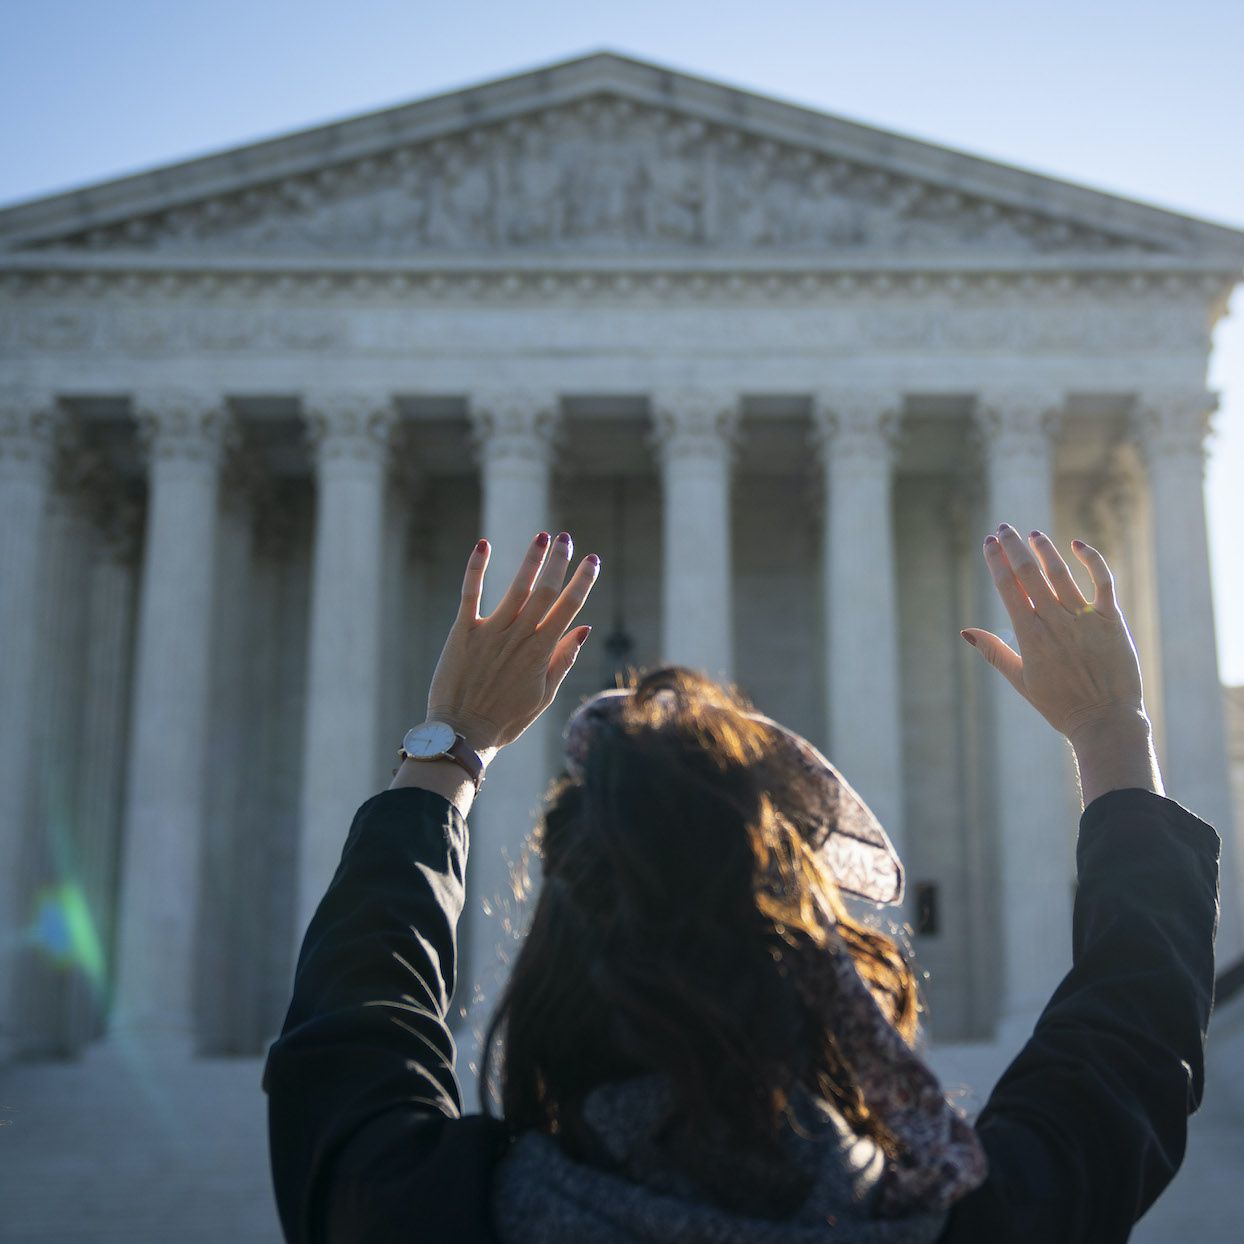 A woman with the pro-life organization Bound4Life raises her hands in prayer outside of the U.S. Supreme Court on October 5, 2020 in Washington, DC. With 8 justices currently on the bench, the Supreme Court begins a new term on Monday. With 8 justices currently on the bench, the Supreme Court begins a new term on Monday